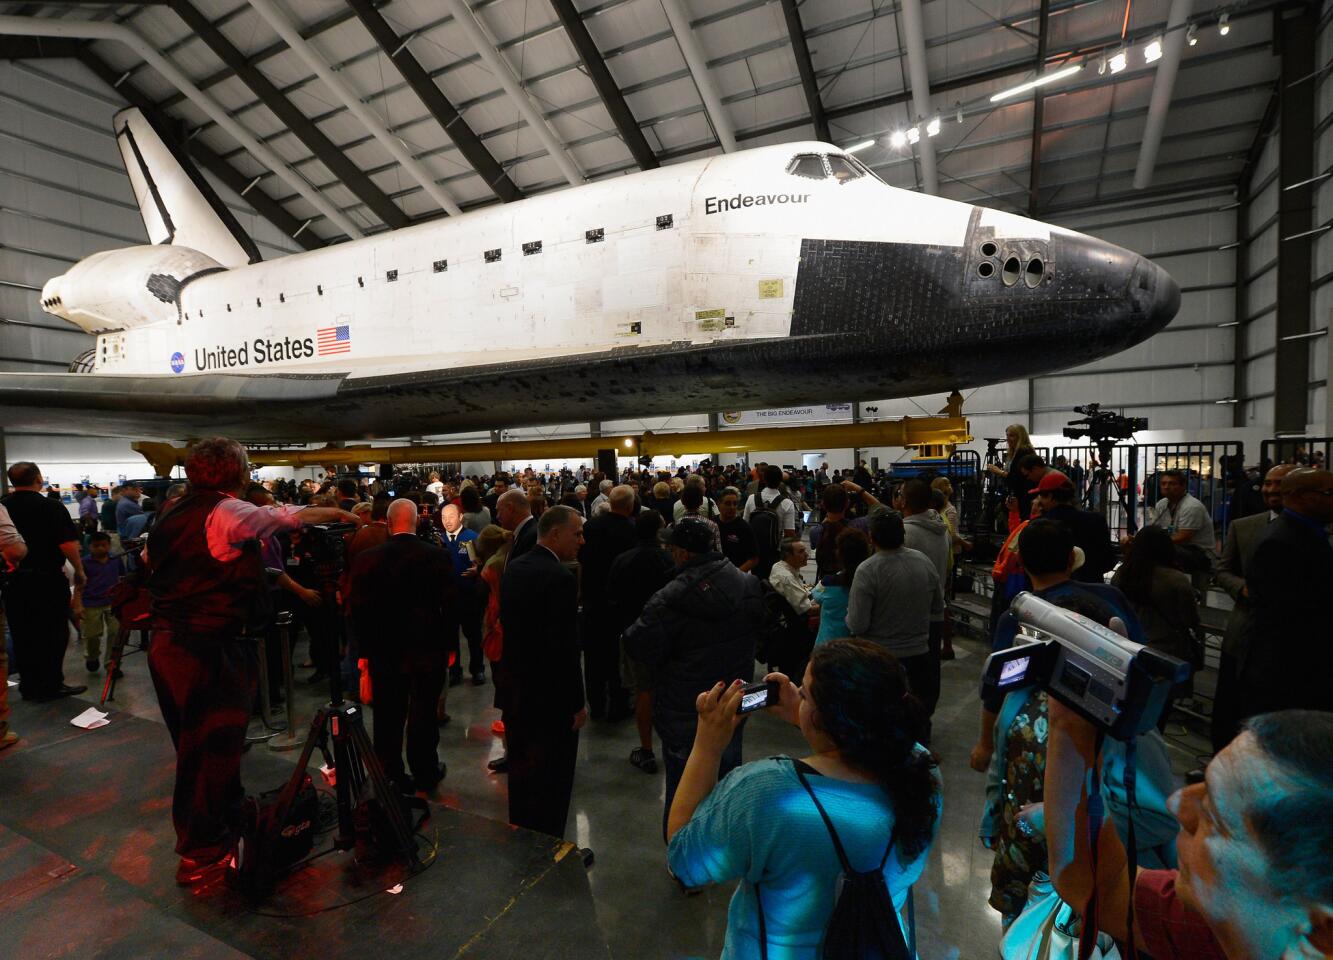 If you missed the flyover or parade through Los Angeles, see the shuttle at the California Science Shuttle. The exhibit, which opened Oct. 30, is accompanied by a companion show, "Endeavour: The California Story," which includes displays and artifacts. Price: $2 service charge per ticket; admission to the California Science Center is free Where to find: California Science Center, 700 Exposition Park Drive, Los Angeles; reserve tickets online at http://www.californiasciencecenter.org/Exhibits/AirAndSpace/endeavour/endeavour.php --JL